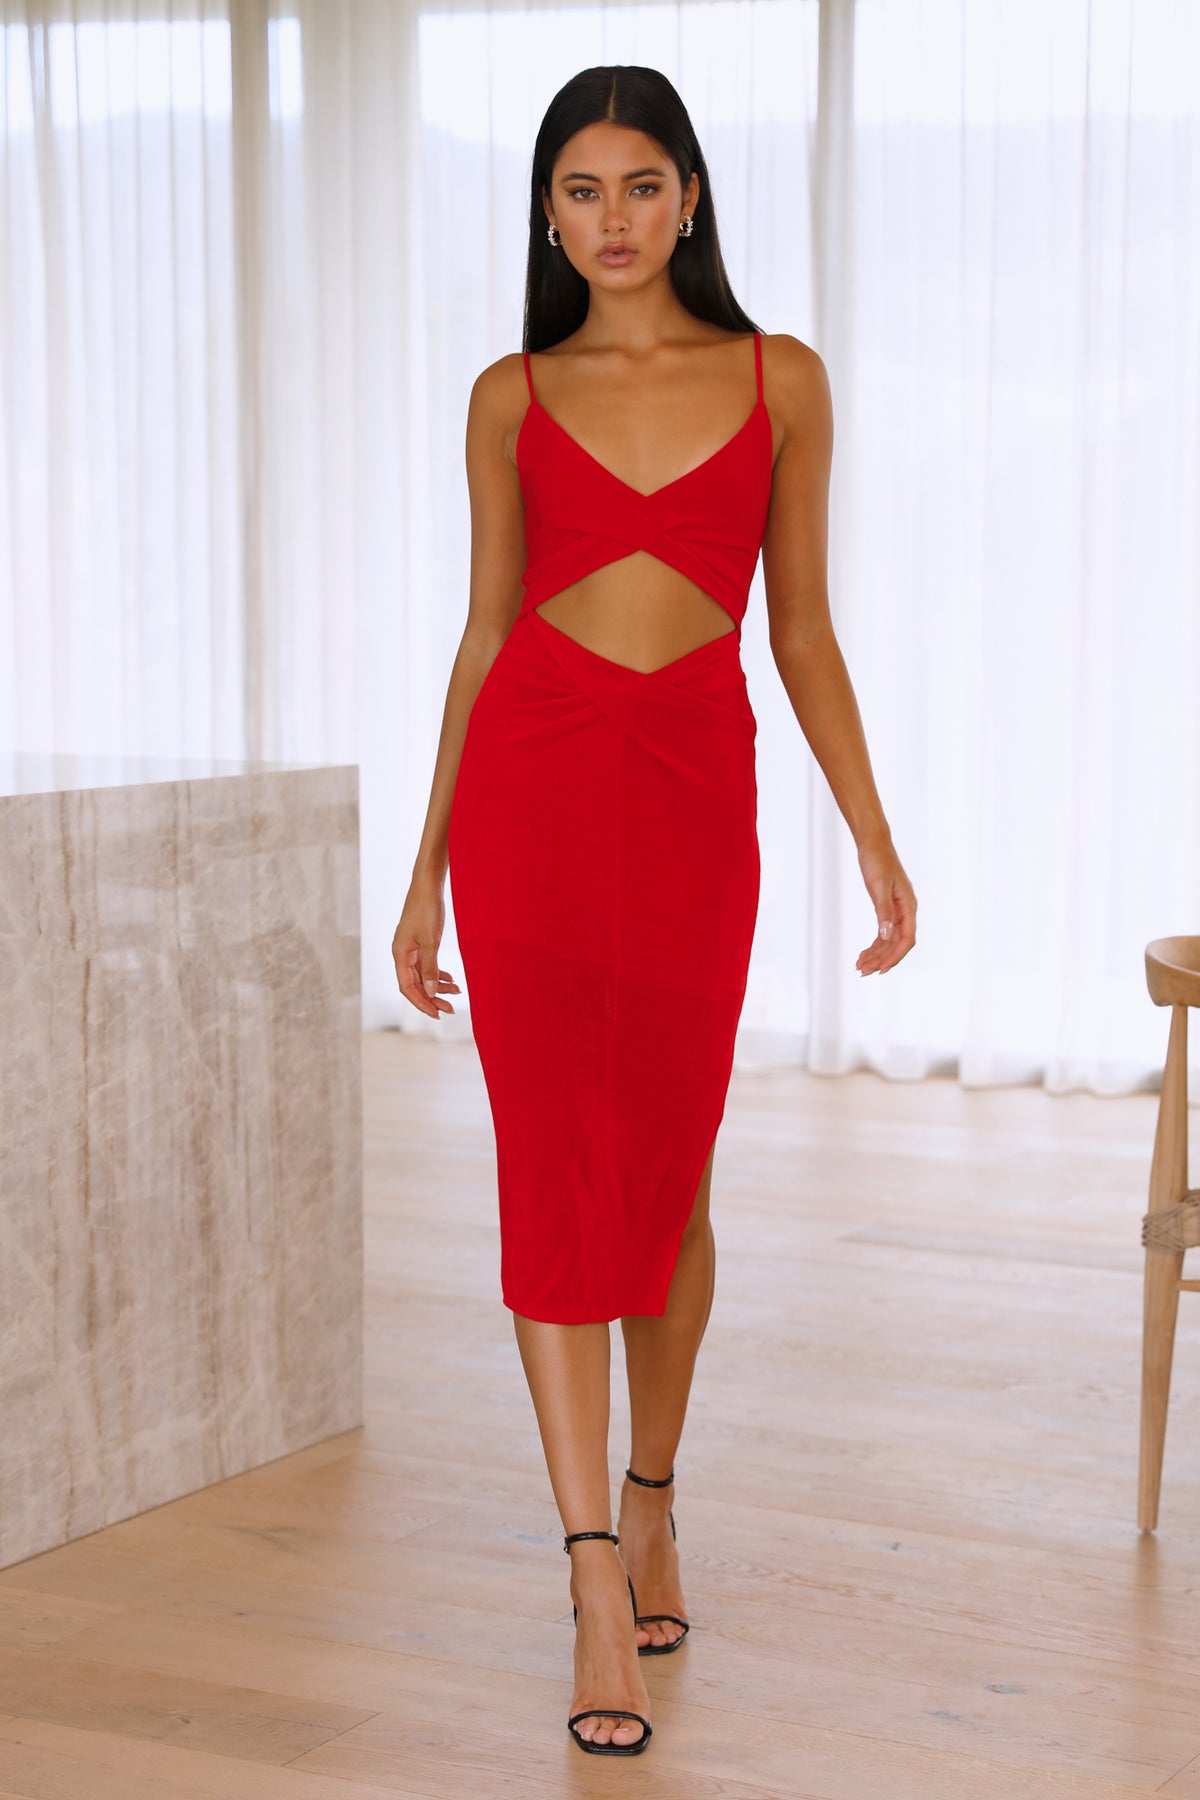 Shop Formal Dress - Fallin Into You Maxi Dress Red secondary image